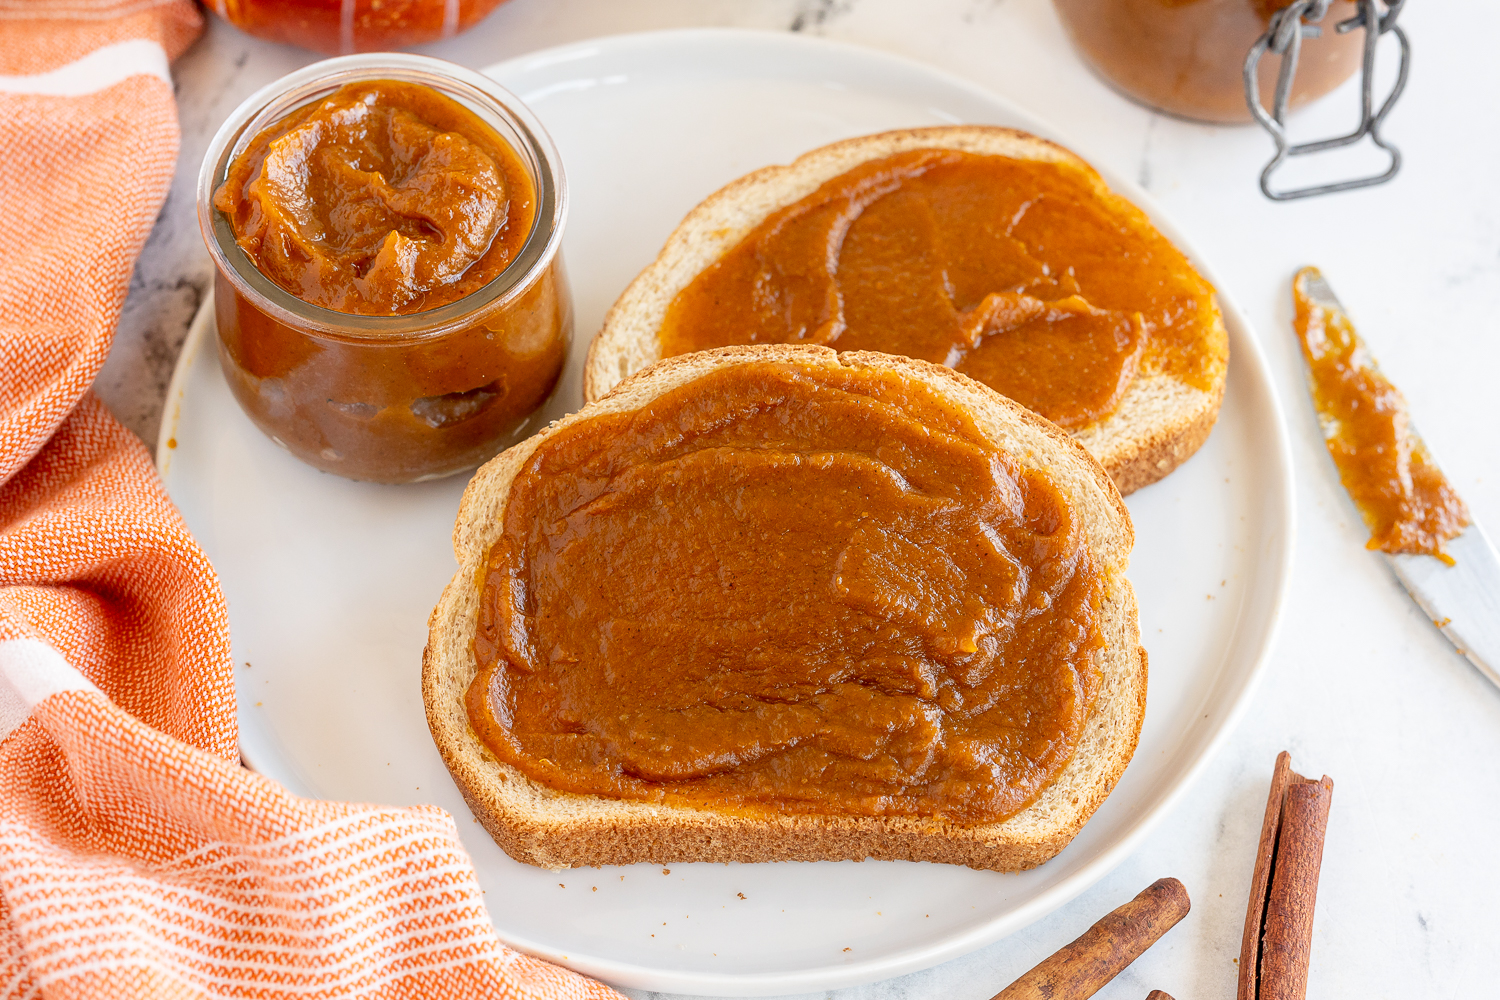 Pumpkin Butter spread on two pieces of toast on a white plate with an orange linen napkin